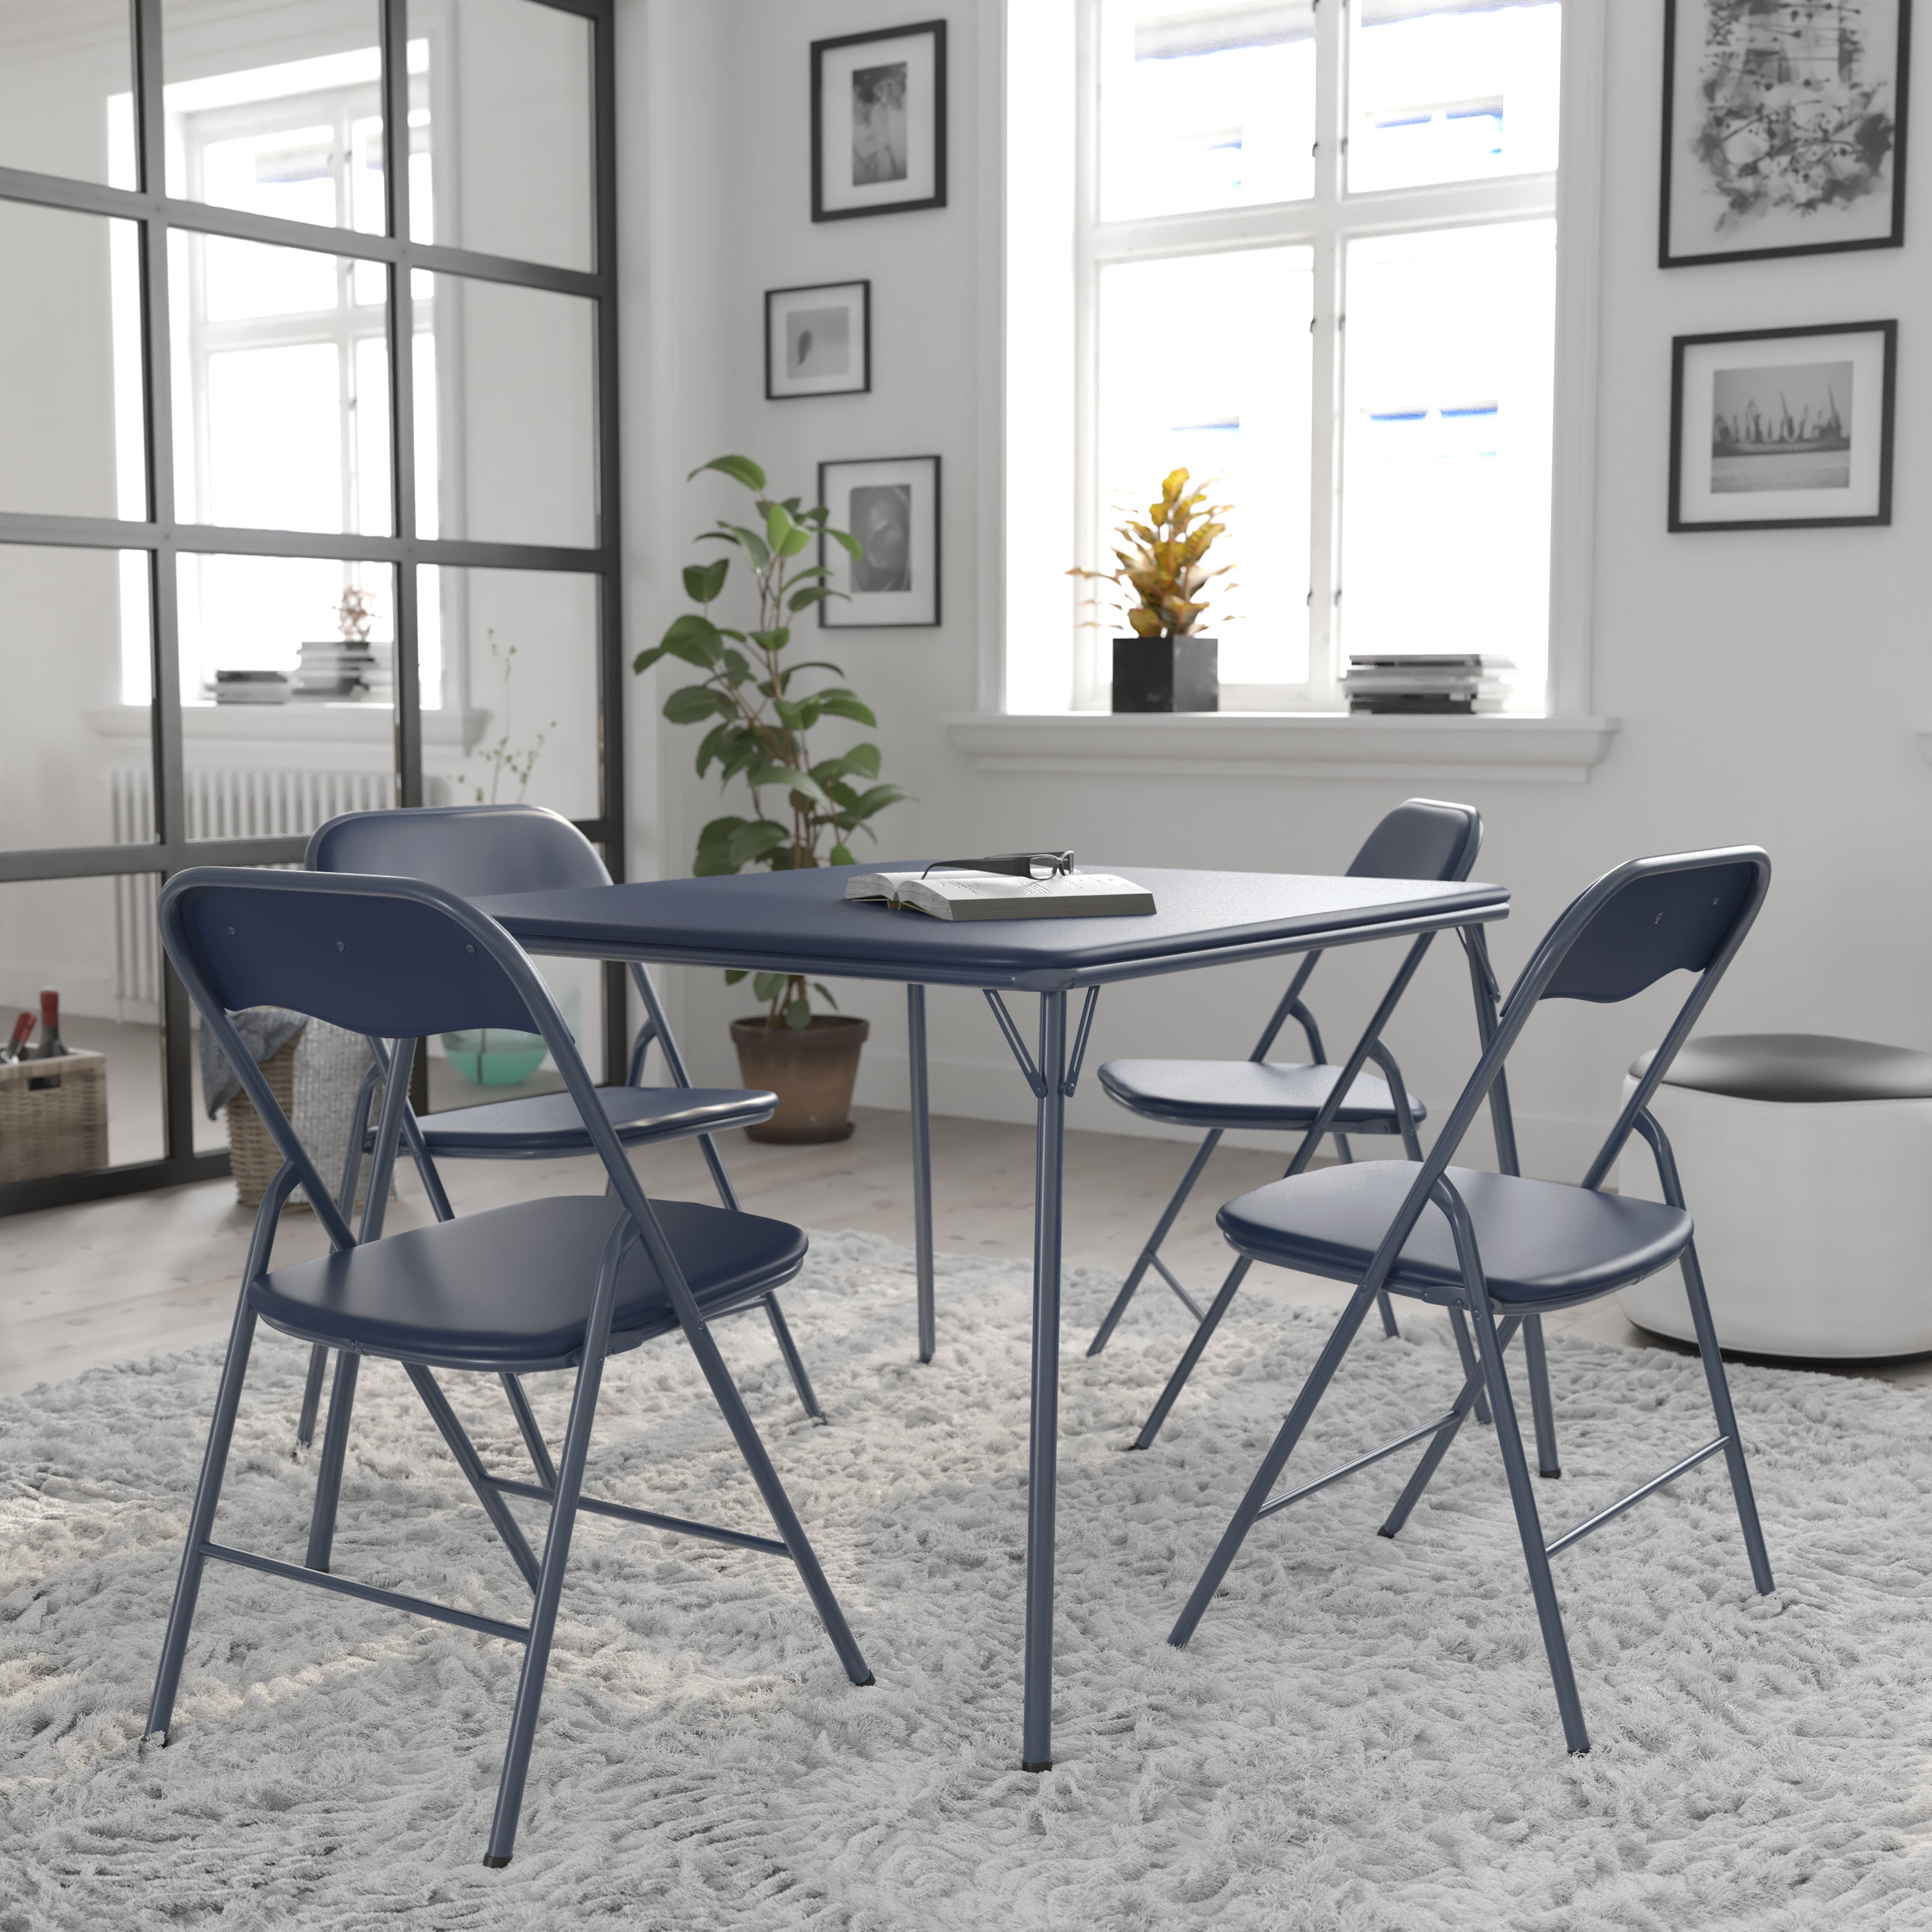 5 Piece Folding Card Table and Chair Set-Folding Game Table and Chair Set-Flash Furniture-Wall2Wall Furnishings